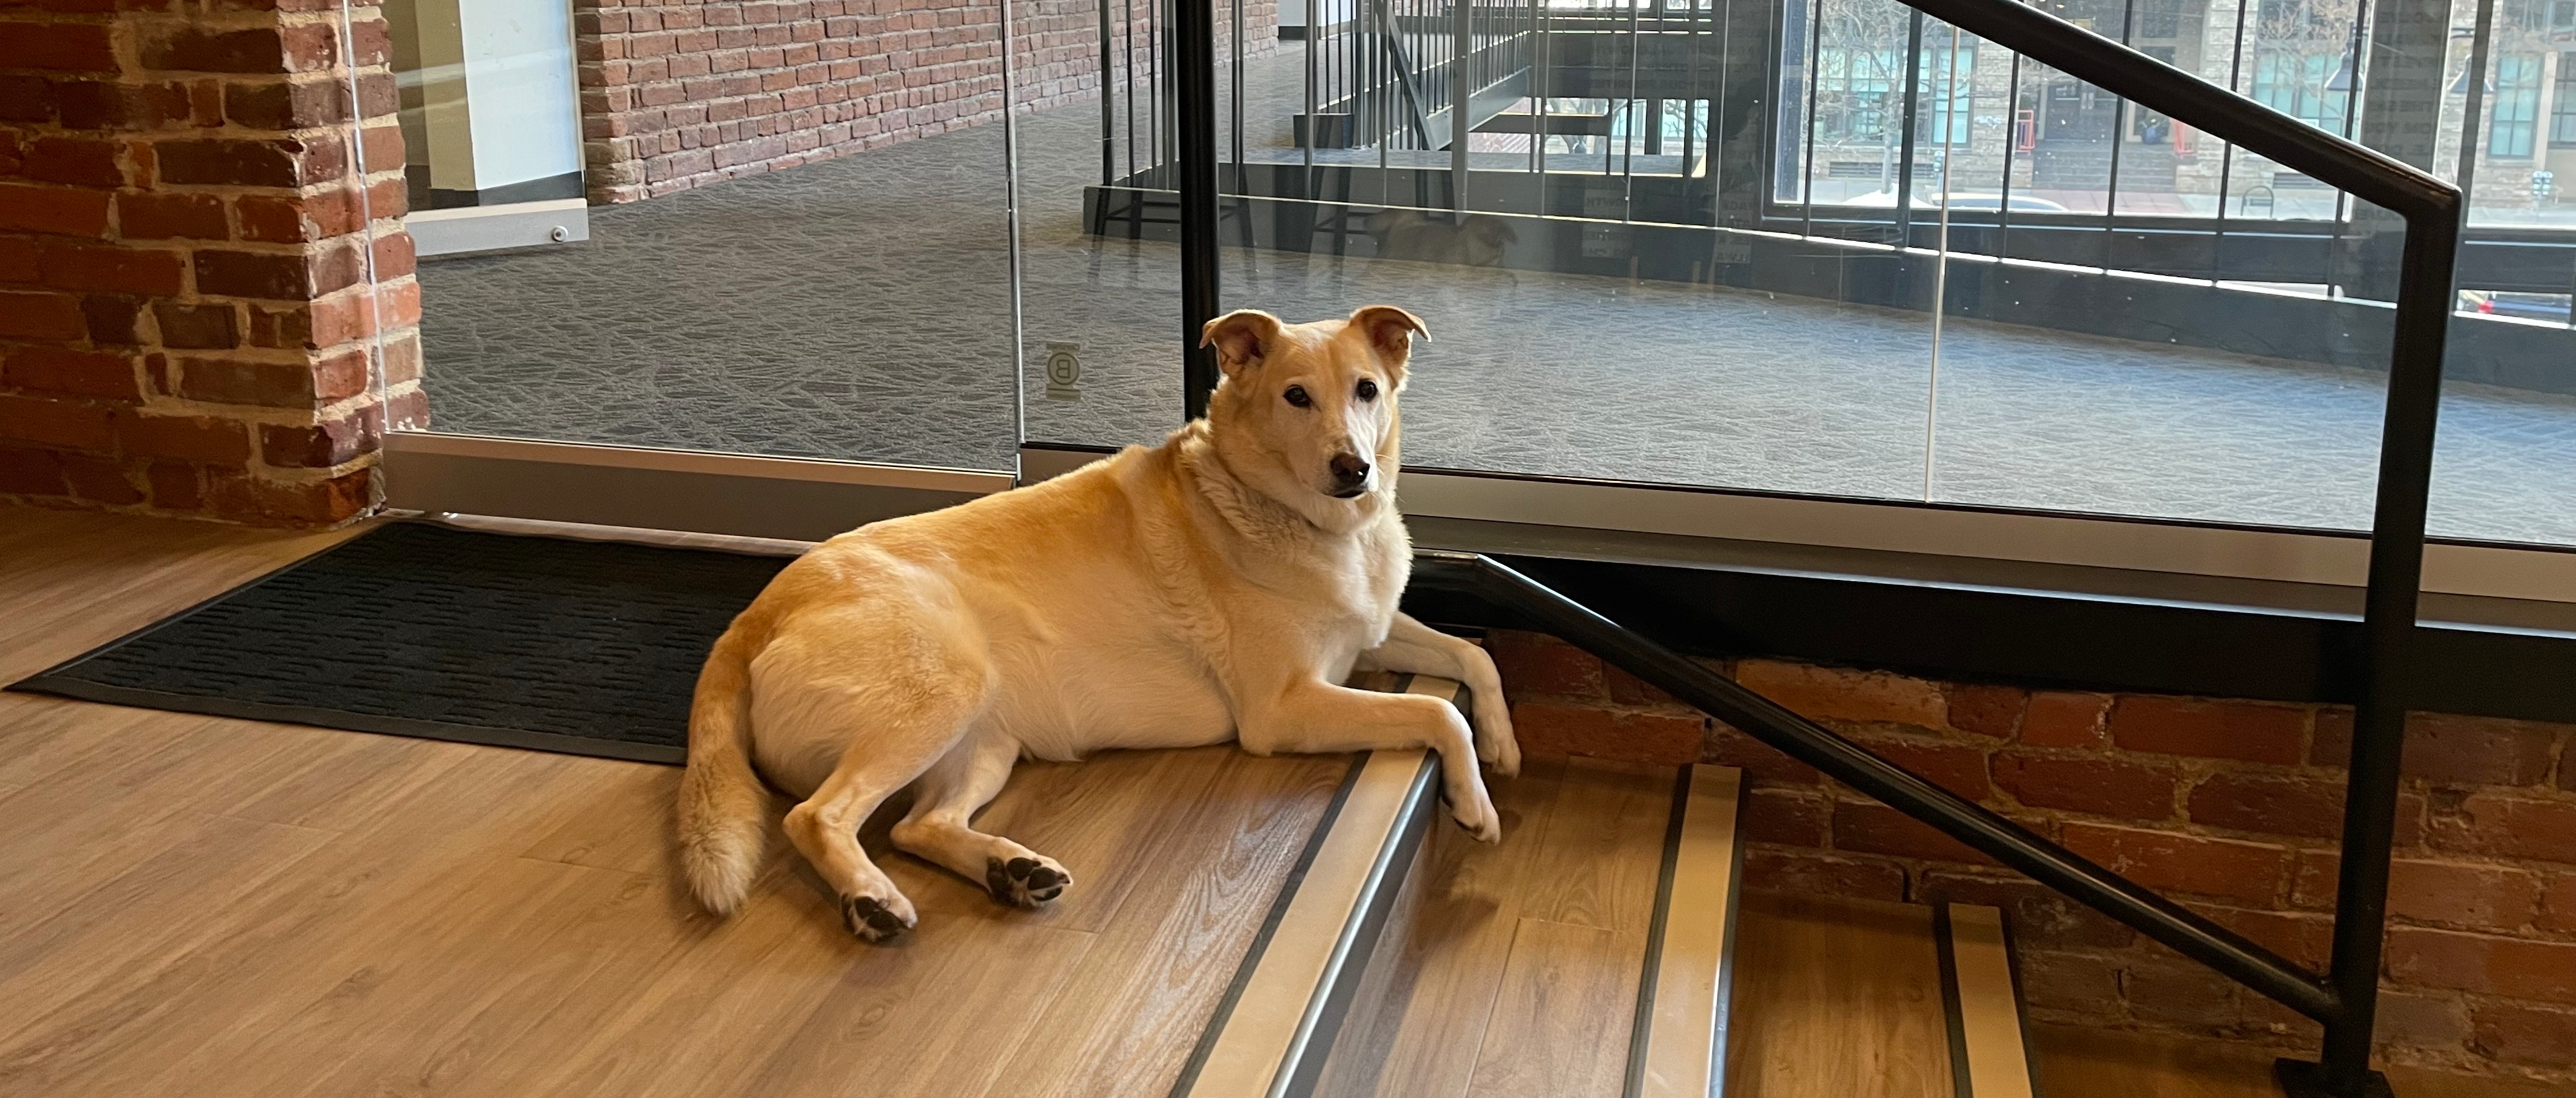 Never hurts when the office is dog friendly, too!